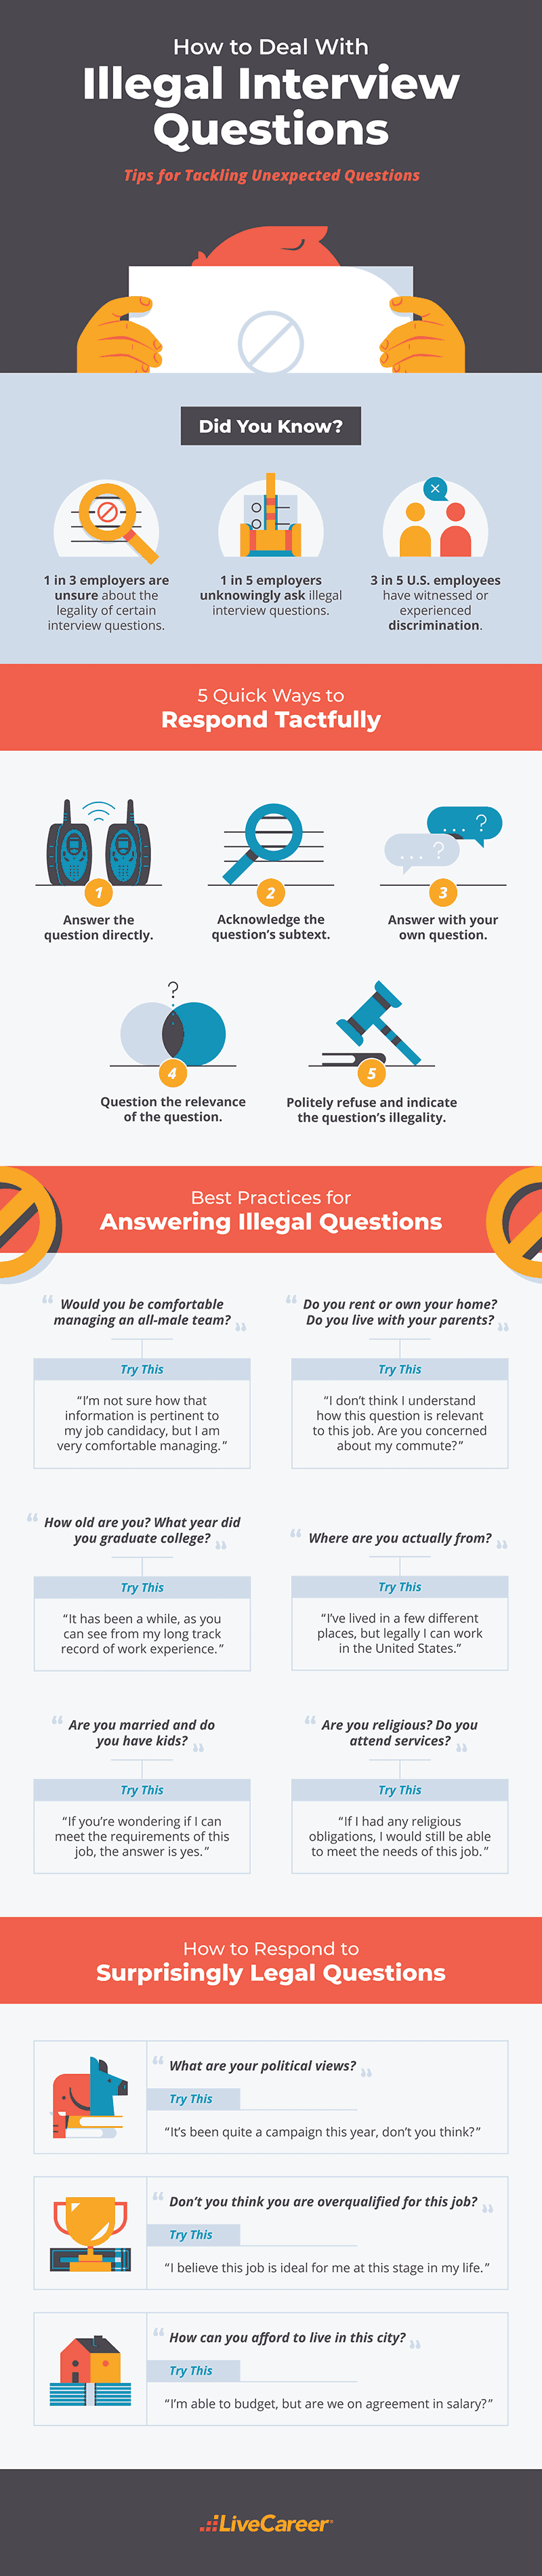 illegal interview questions infographic 800